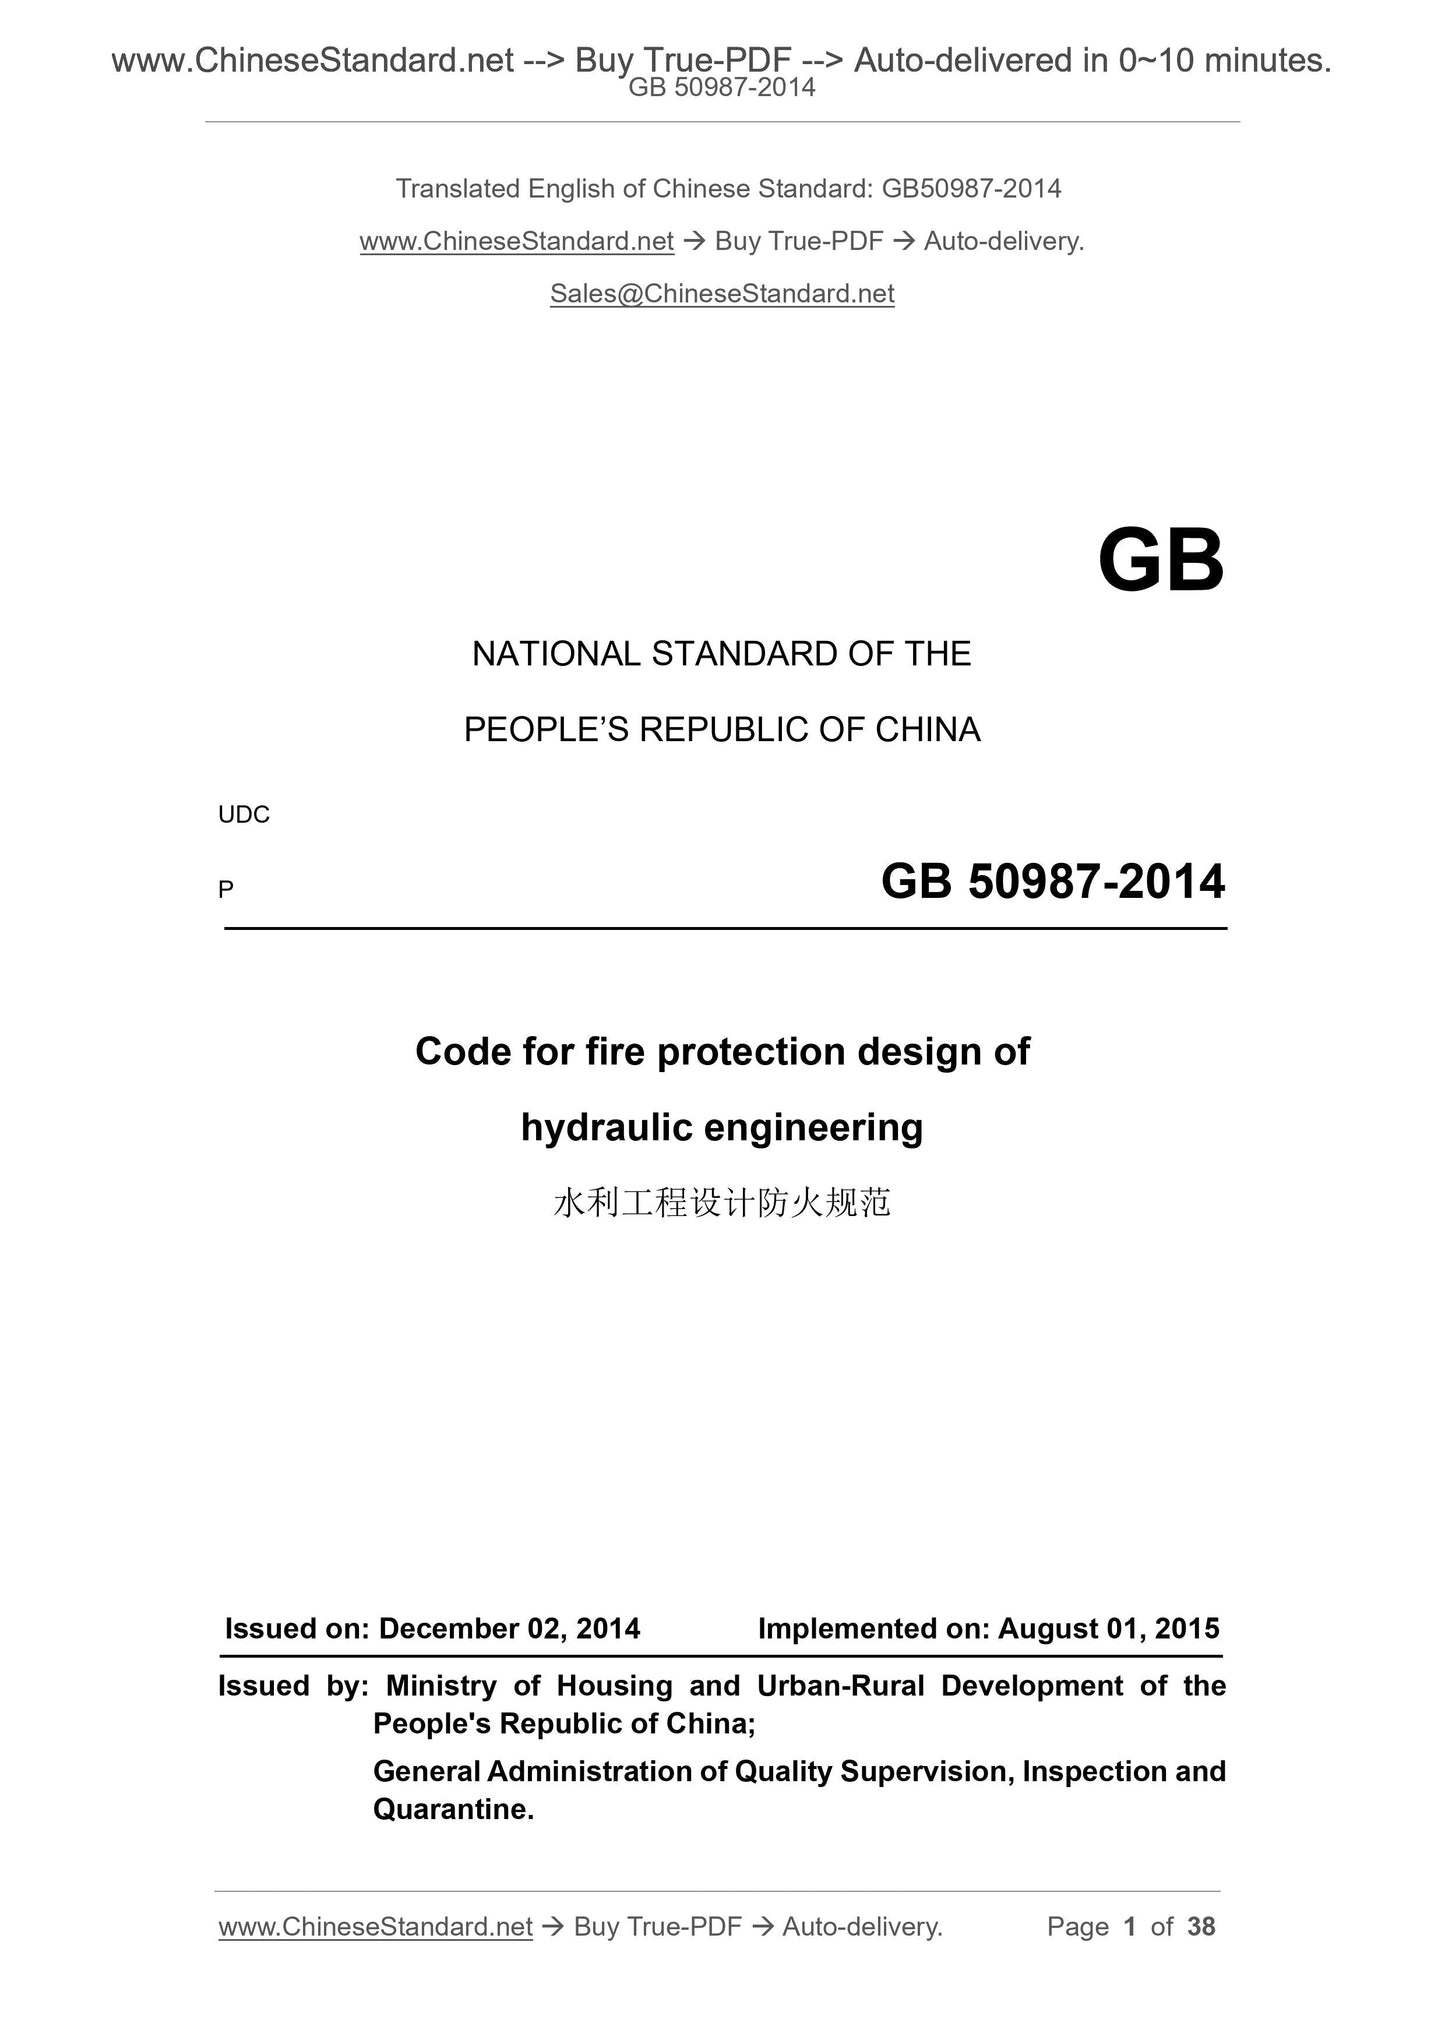 GB 50987-2014 Page 1